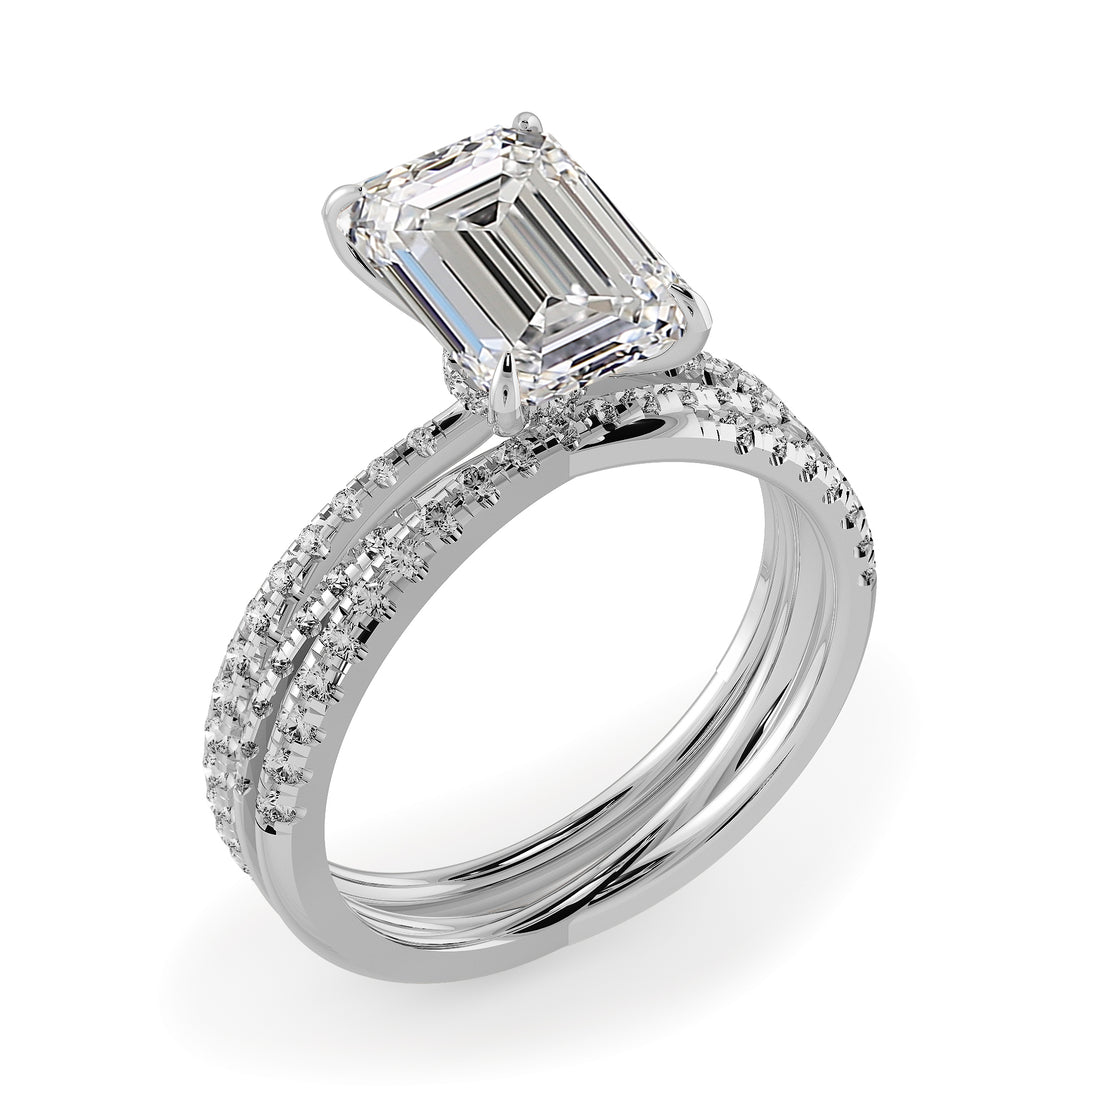 Emerald Cut Pave Engagement And Wedding Ring Set  - 722